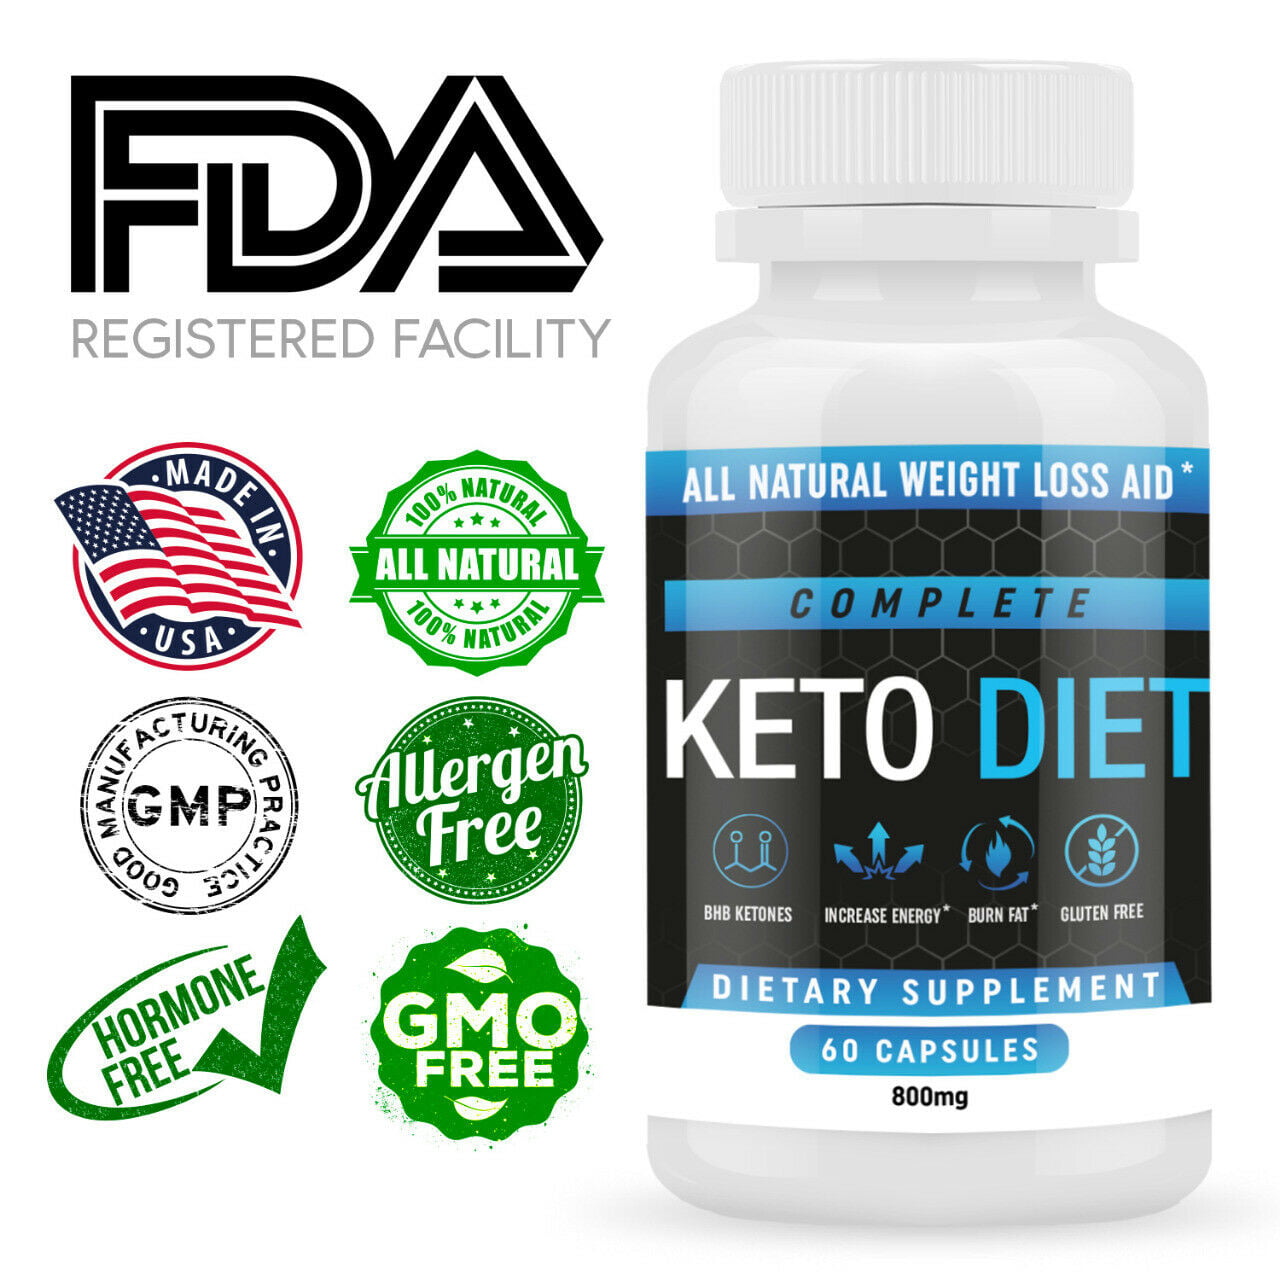 Keto Diet Pills Weight Loss Supplements To Burn Fat Fast Shark Tank Carb Blocker And Energy Booster For Women Men Complete Keto Diet 60